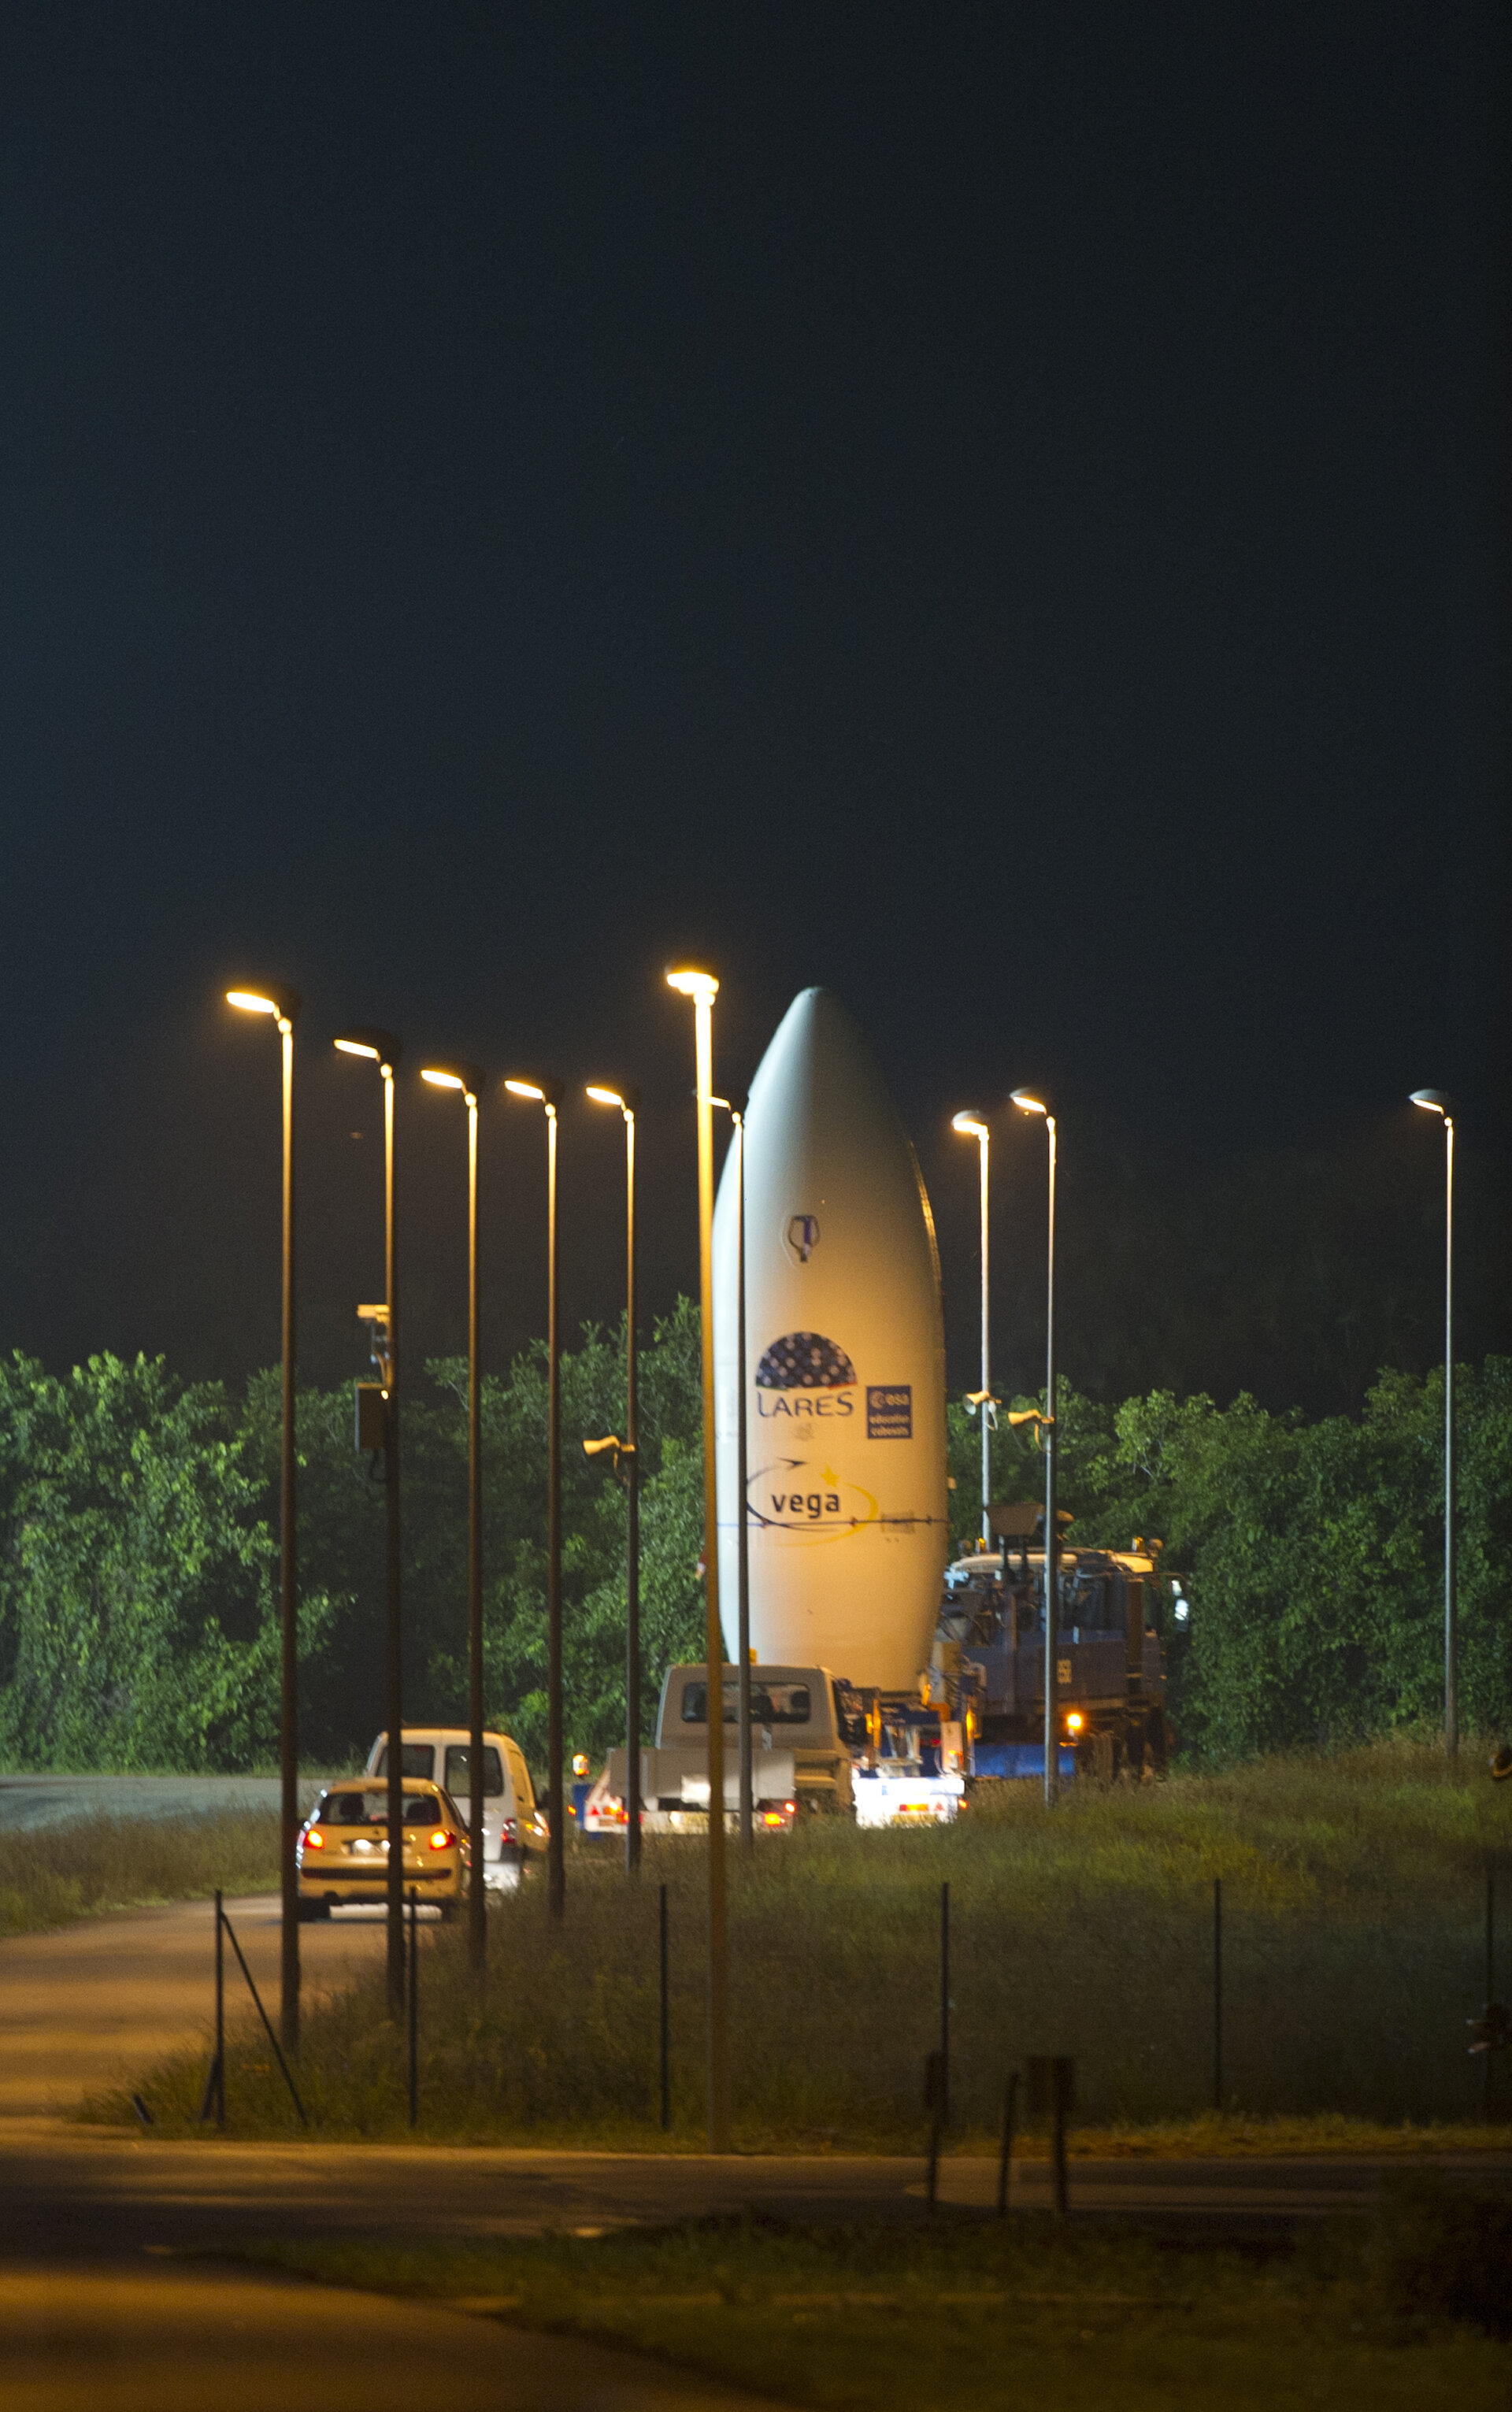 Upper composite transfer to launch pad